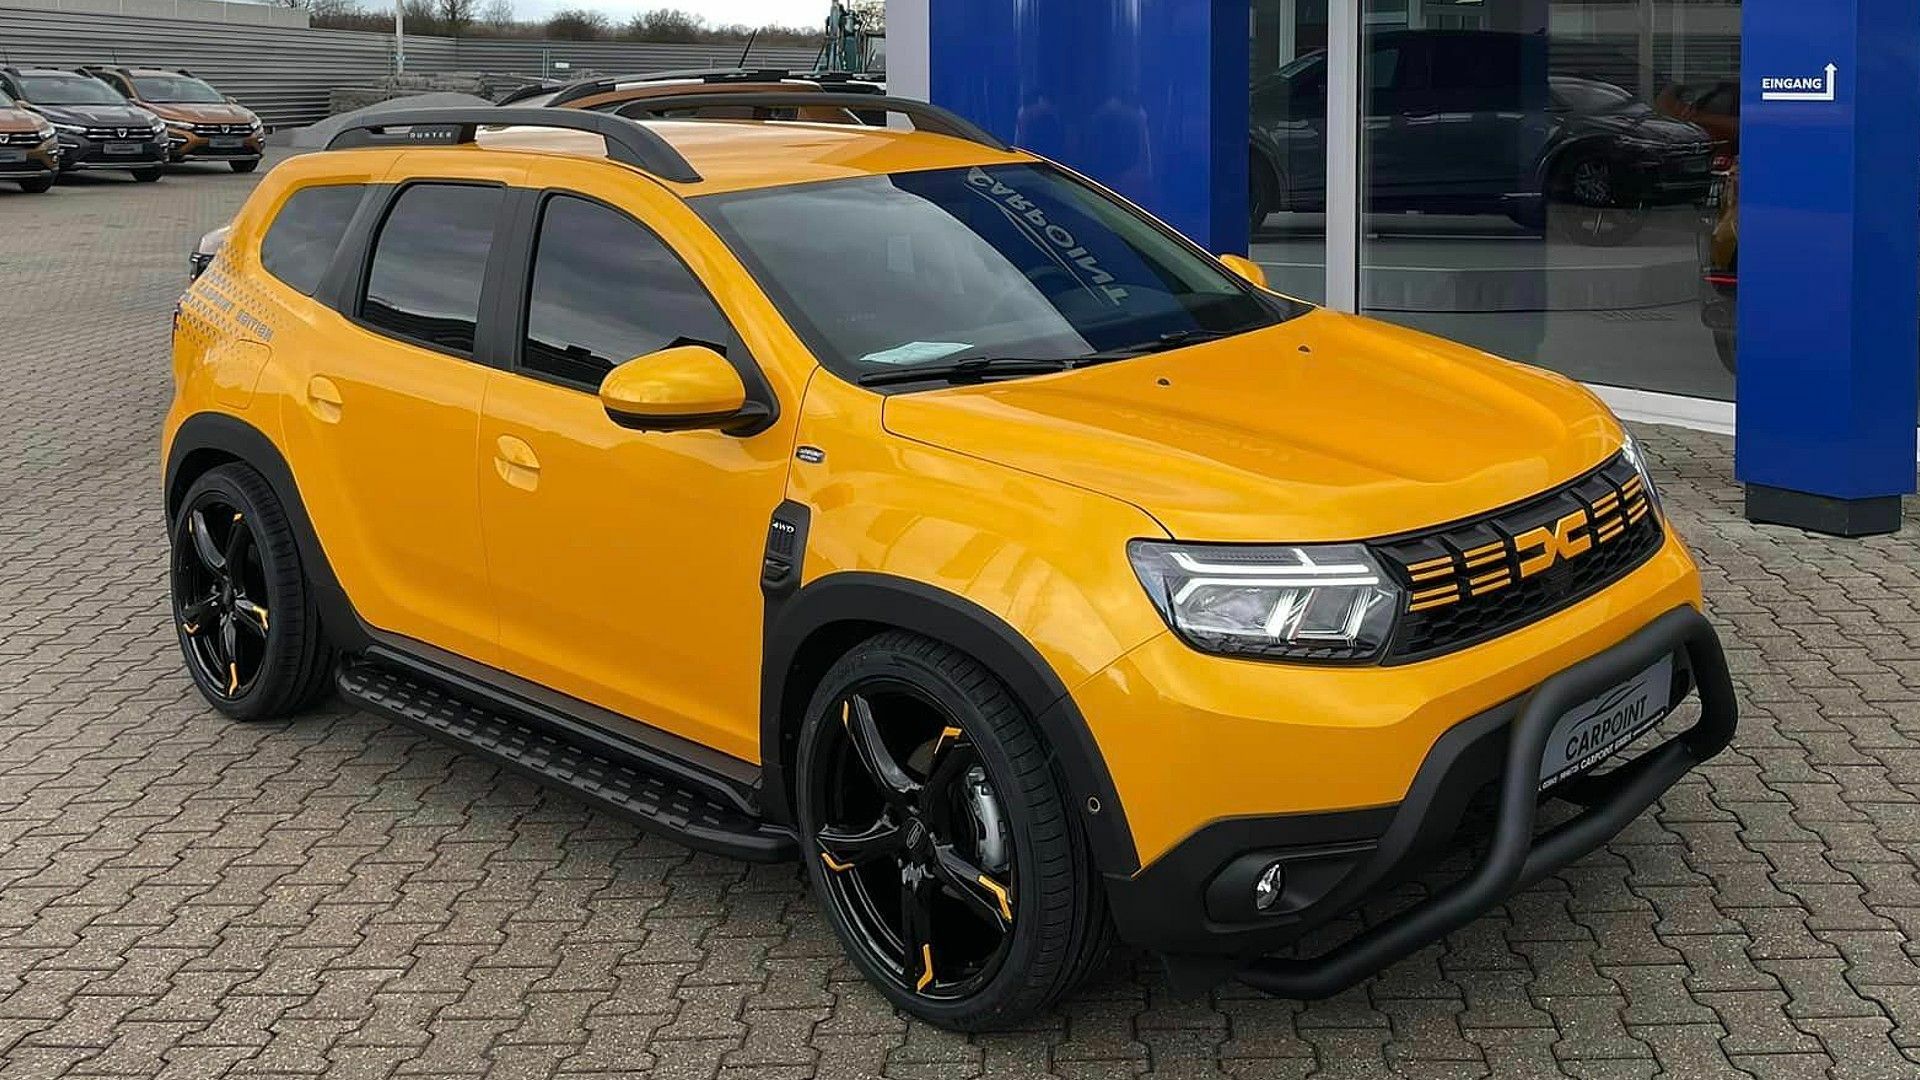 https://www.carscoops.com/wp-content/uploads/2023/04/Dacia-Duster-Tuned-By-Carpoint-main.jpg